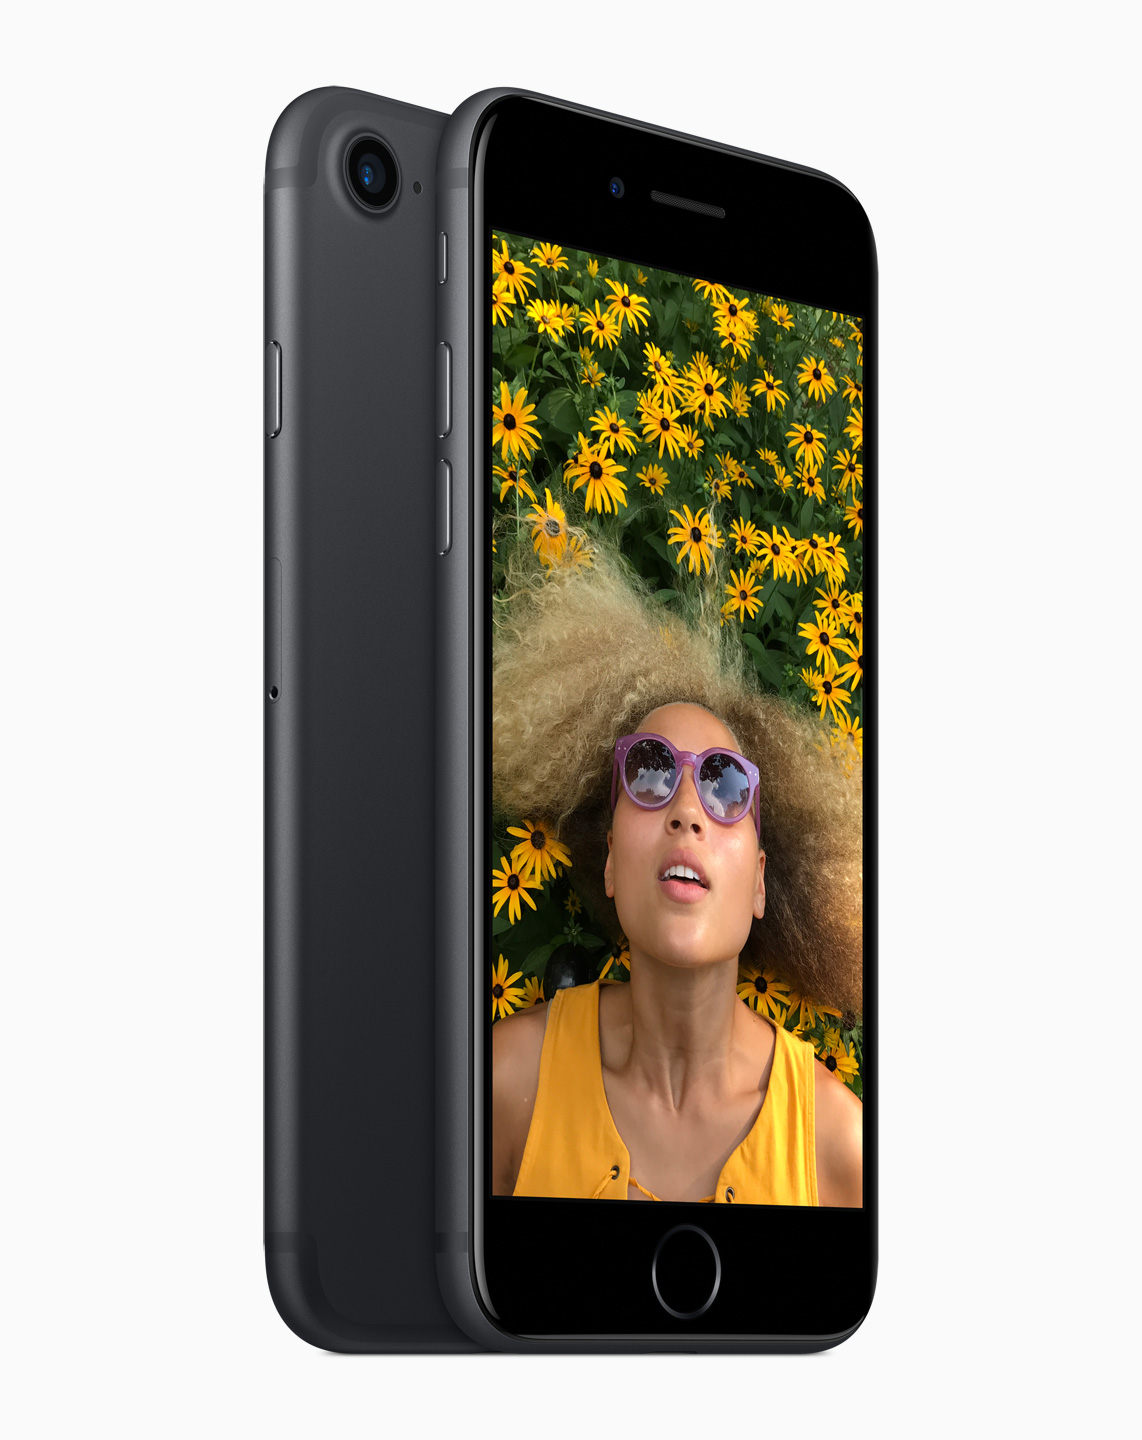 Apple Introduces iPhone 7 & iPhone 7 Plus, the Best, Most Advanced iPhone Ever_1